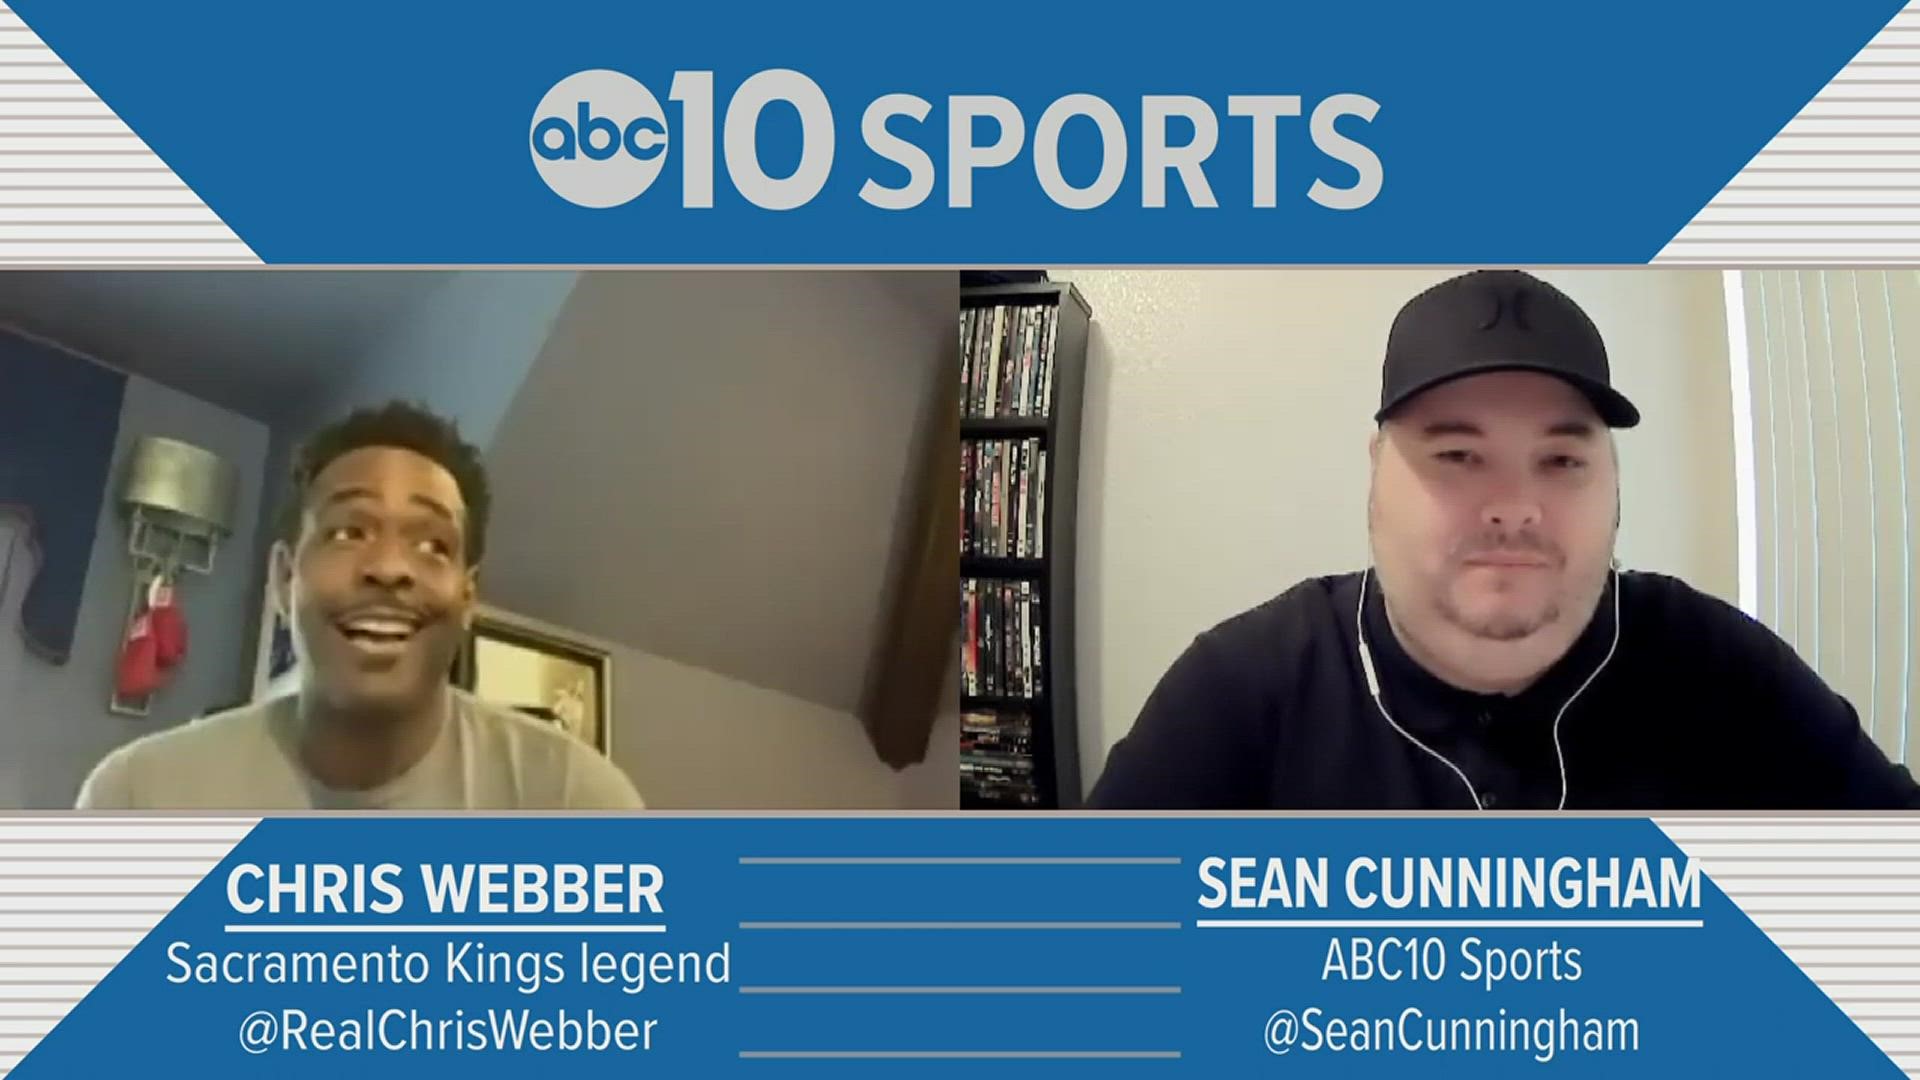 Kings legend Chris Webber joins ABC10's Sean Cunningham for a wide-ranging chat about his Sacramento memories, NBA career & new venture into the cannabis industry.